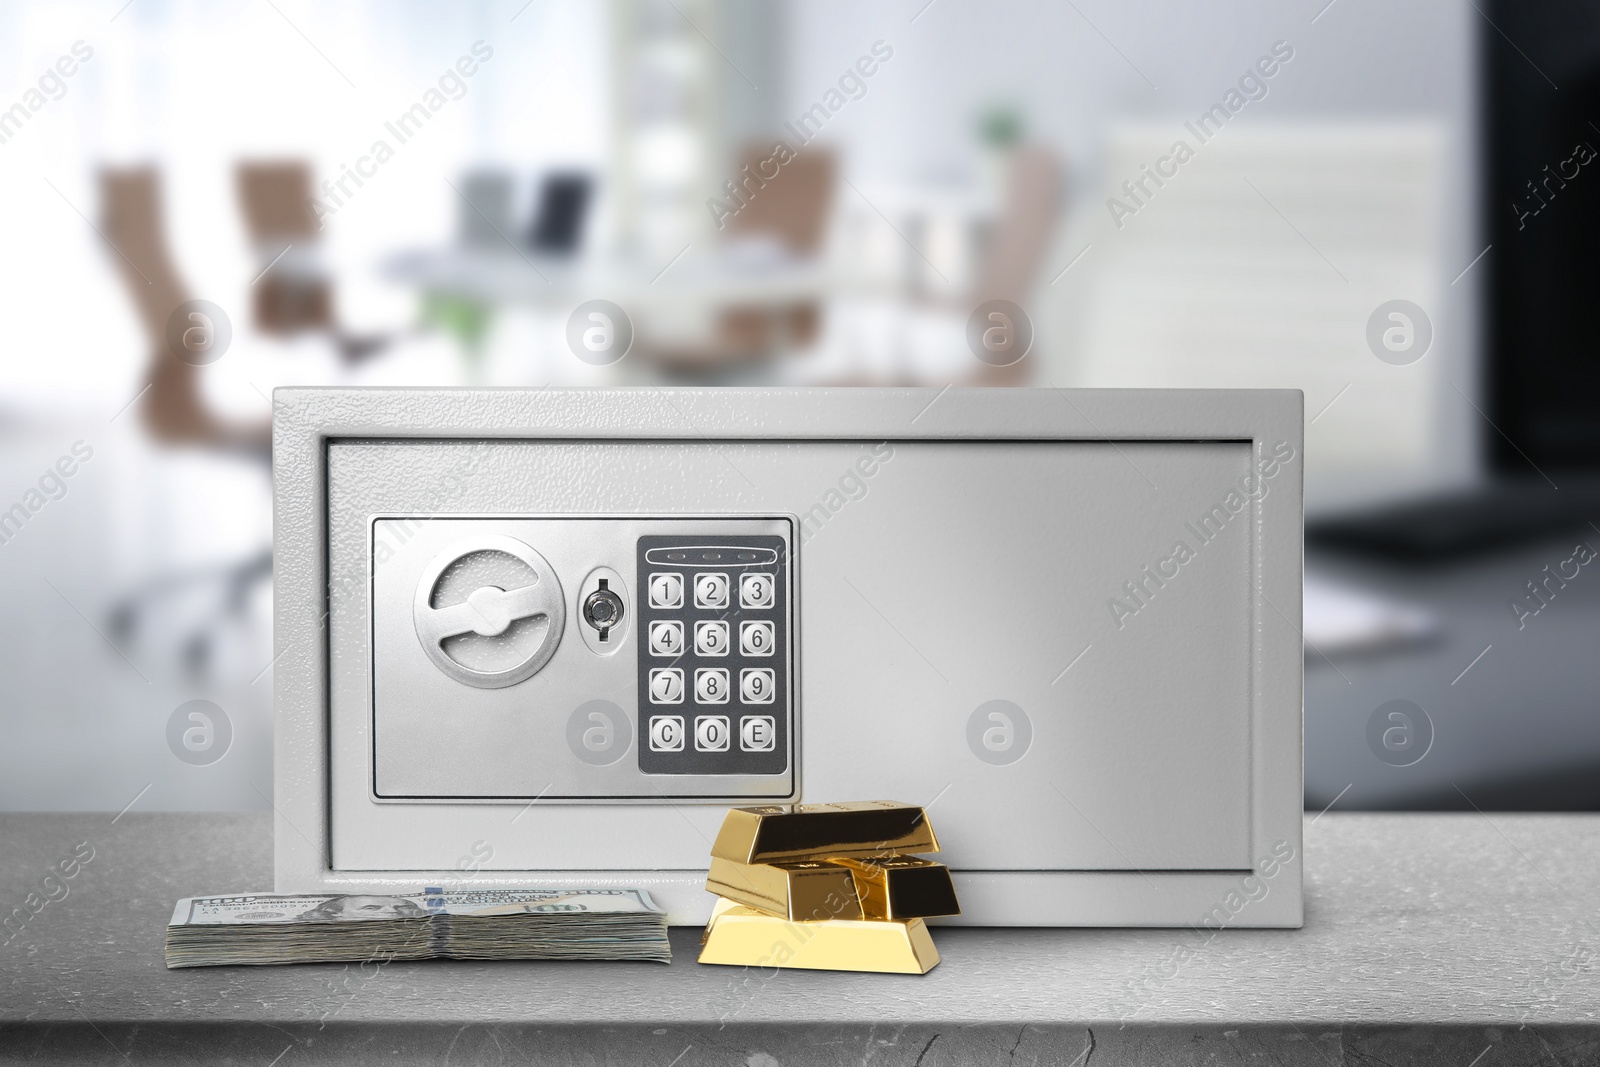 Image of Closed steel safe with electronic lock, money and gold bars on grey table indoors